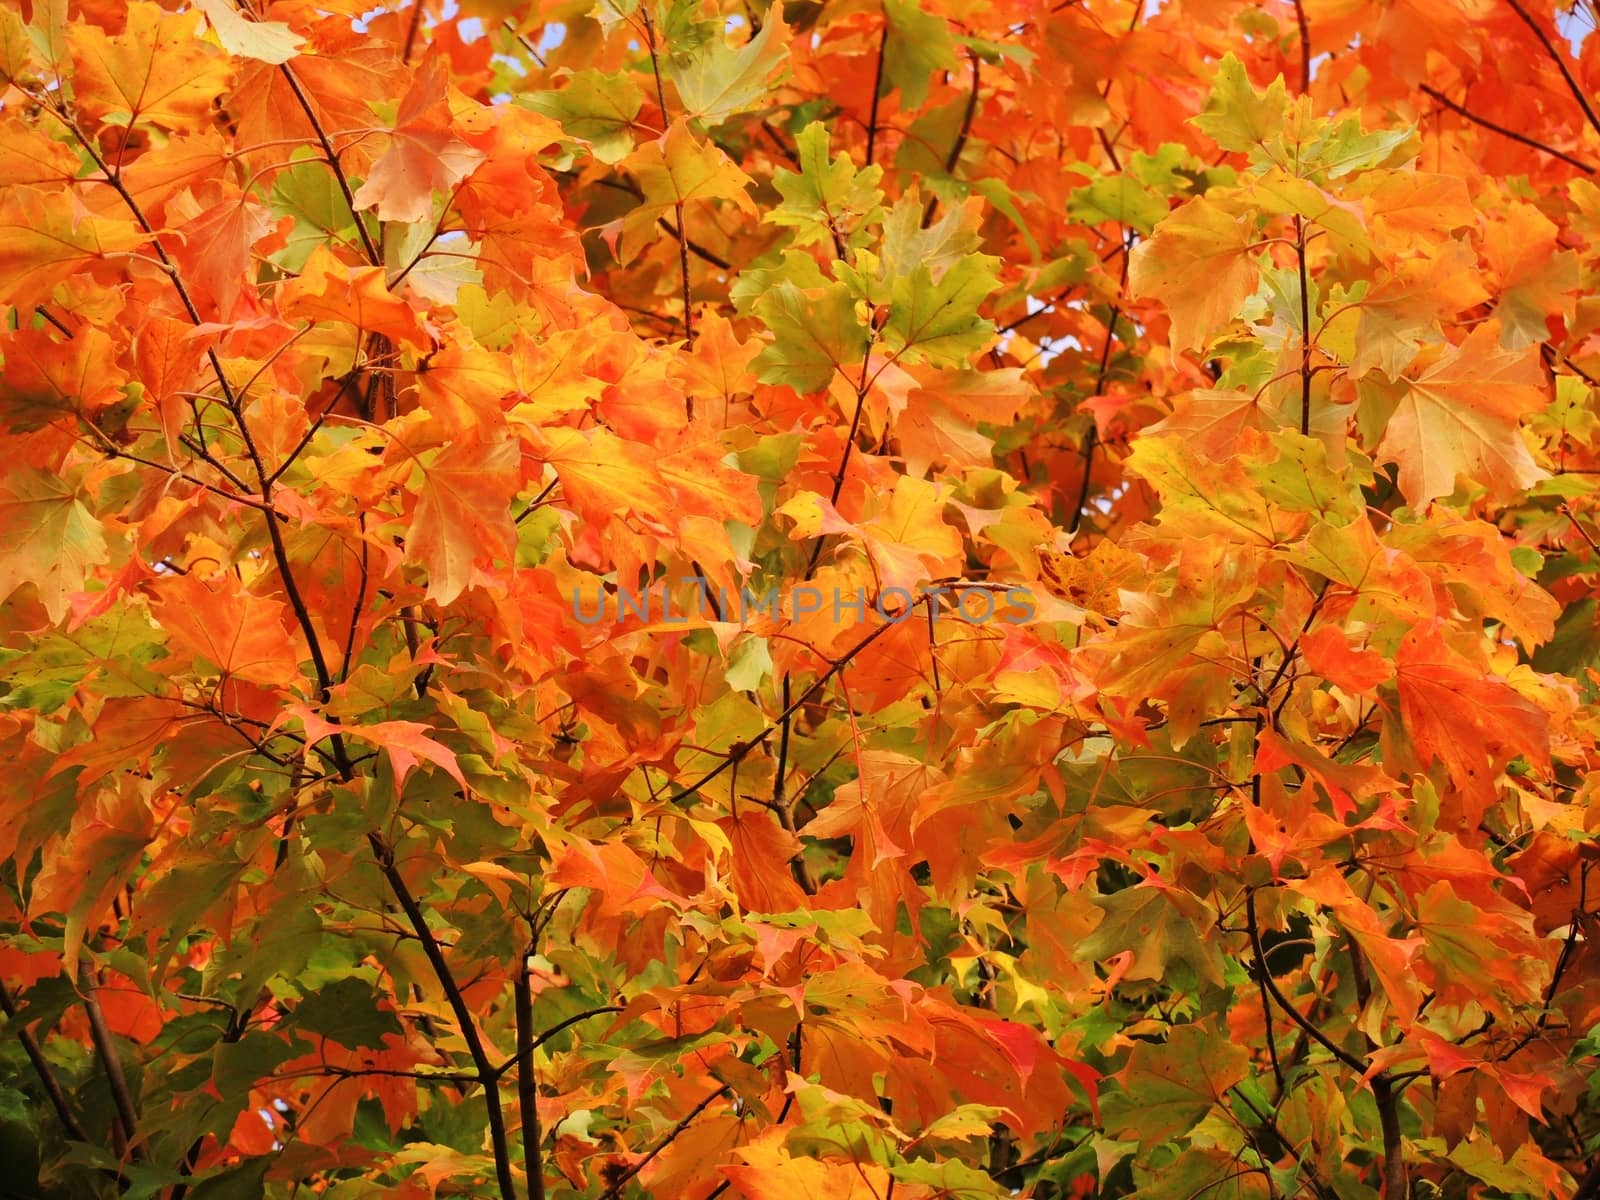 A close-up image of beautiful Autumn leaves.